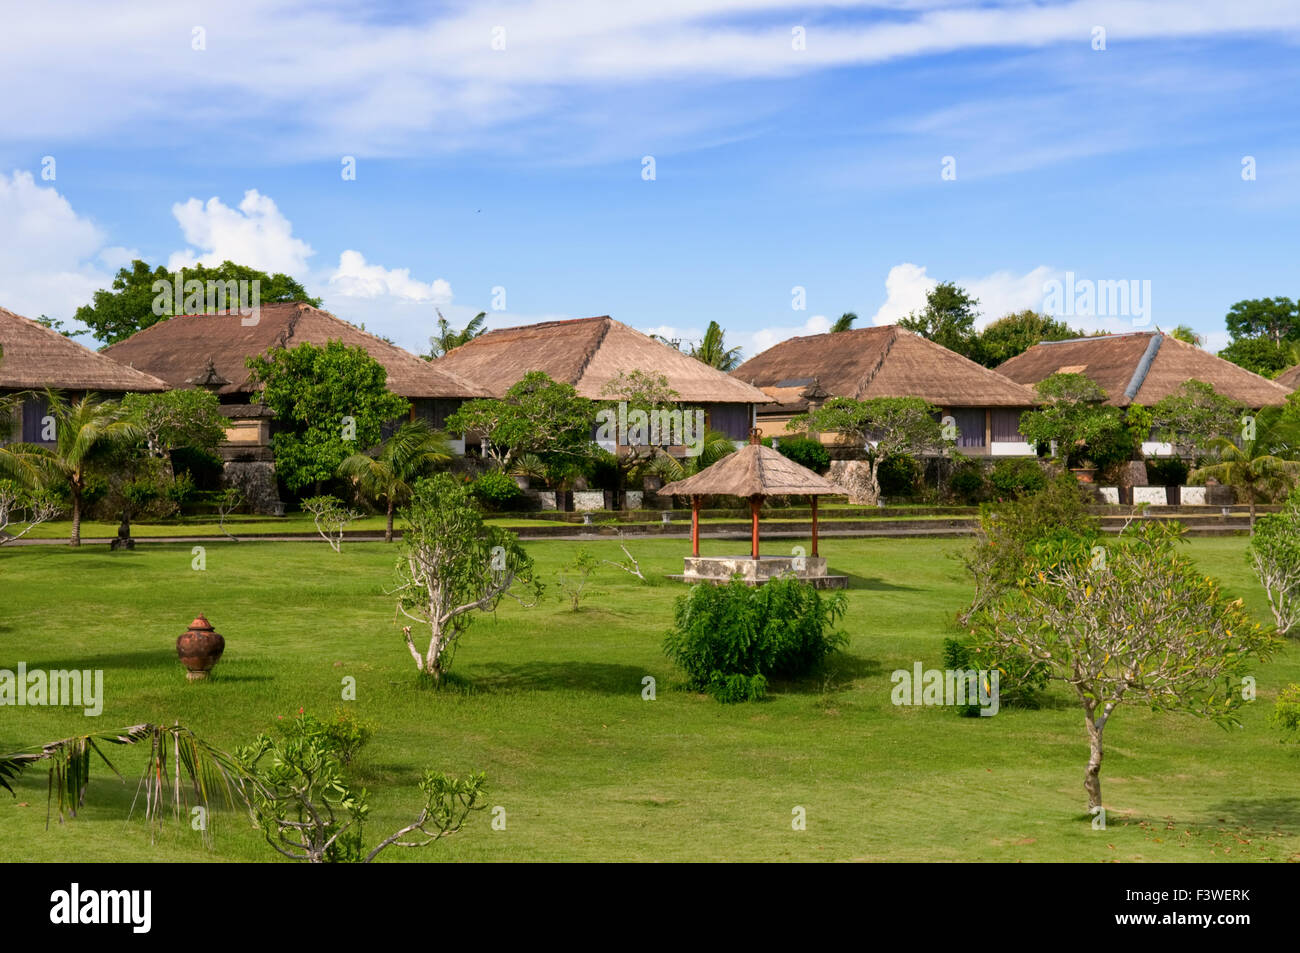 Villas and hut in green field of India Stock Photo